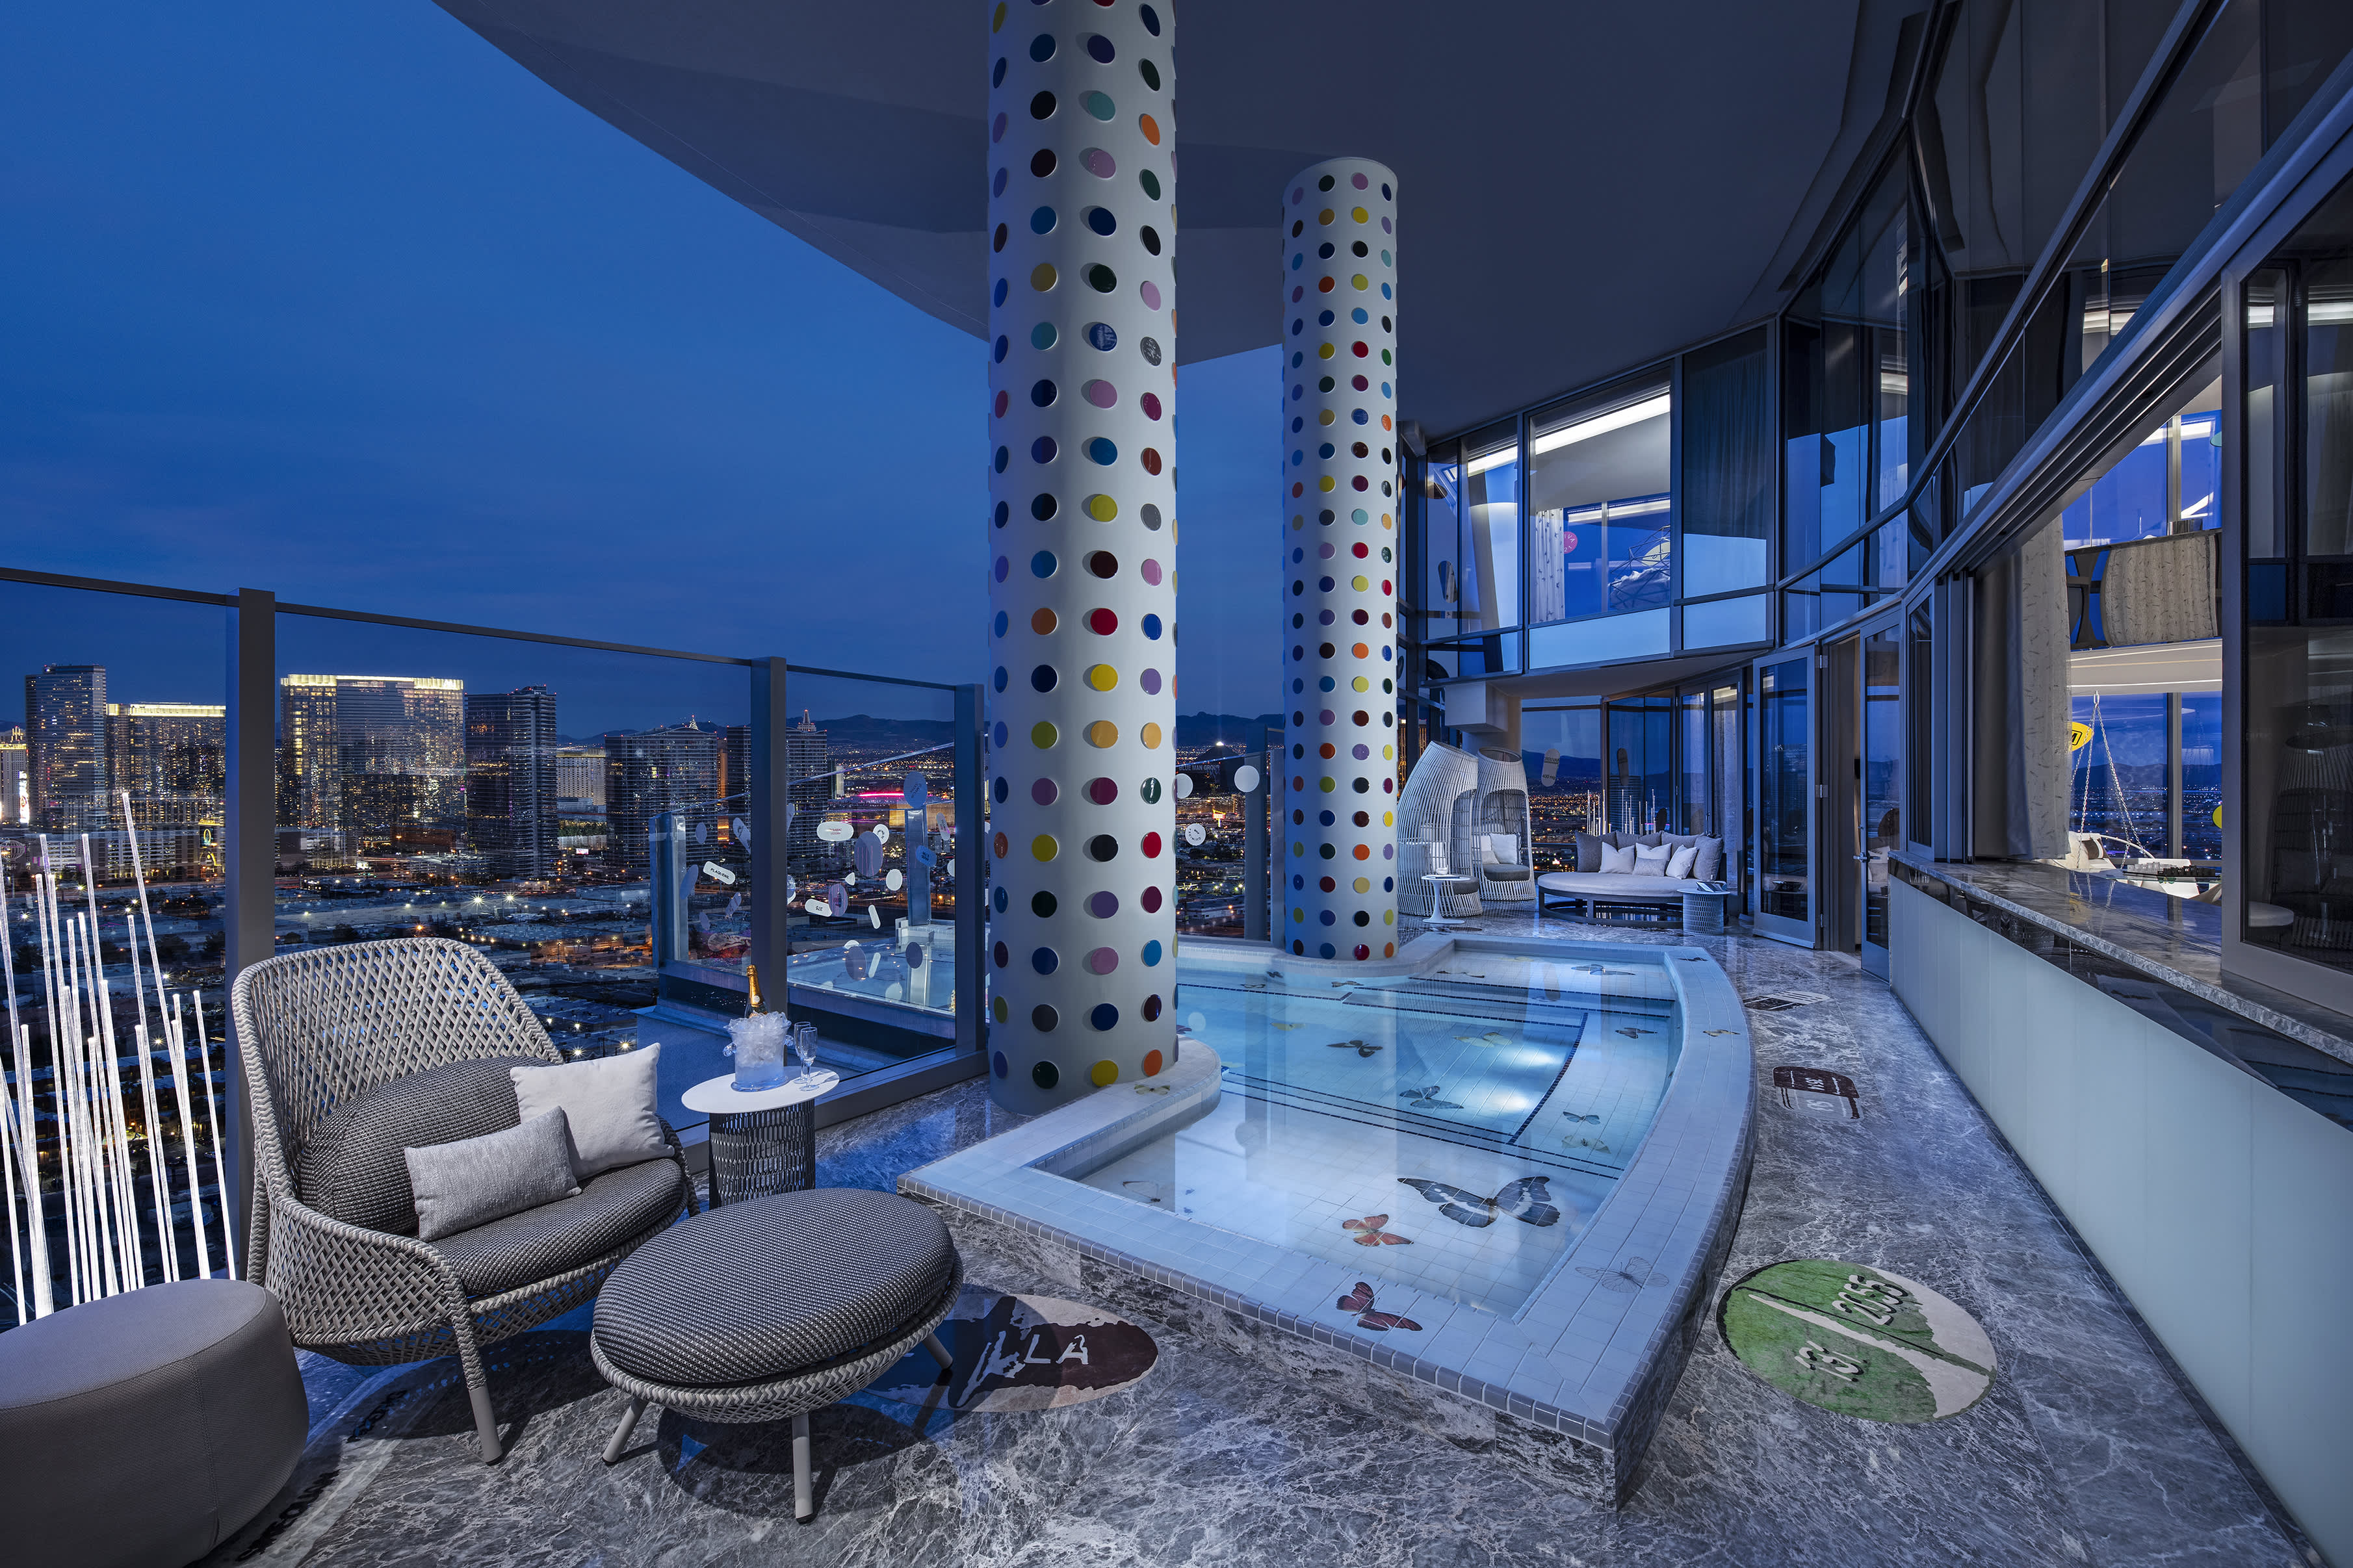 Las Vegas's VIP-Only Suites and Villas Opening to the Public